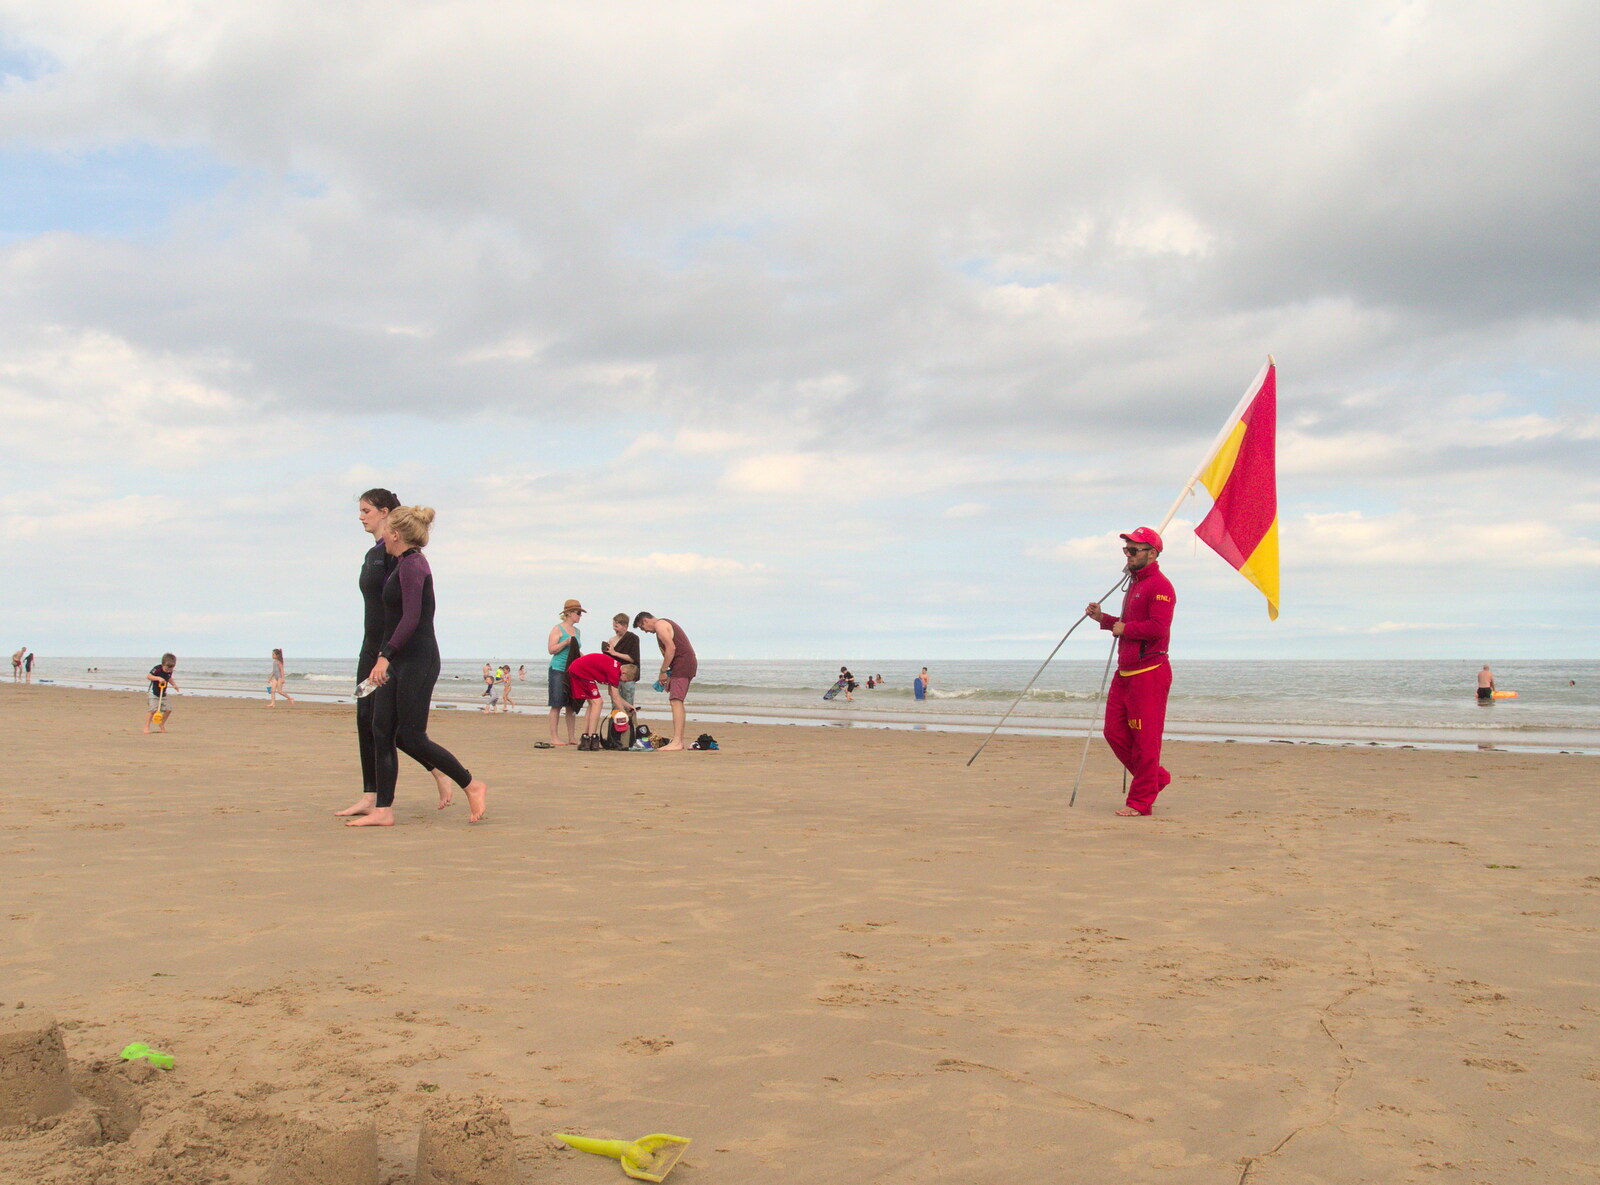 Camping in West Runton, North Norfolk - 30th July 2016: The lifeguard flag is brought in